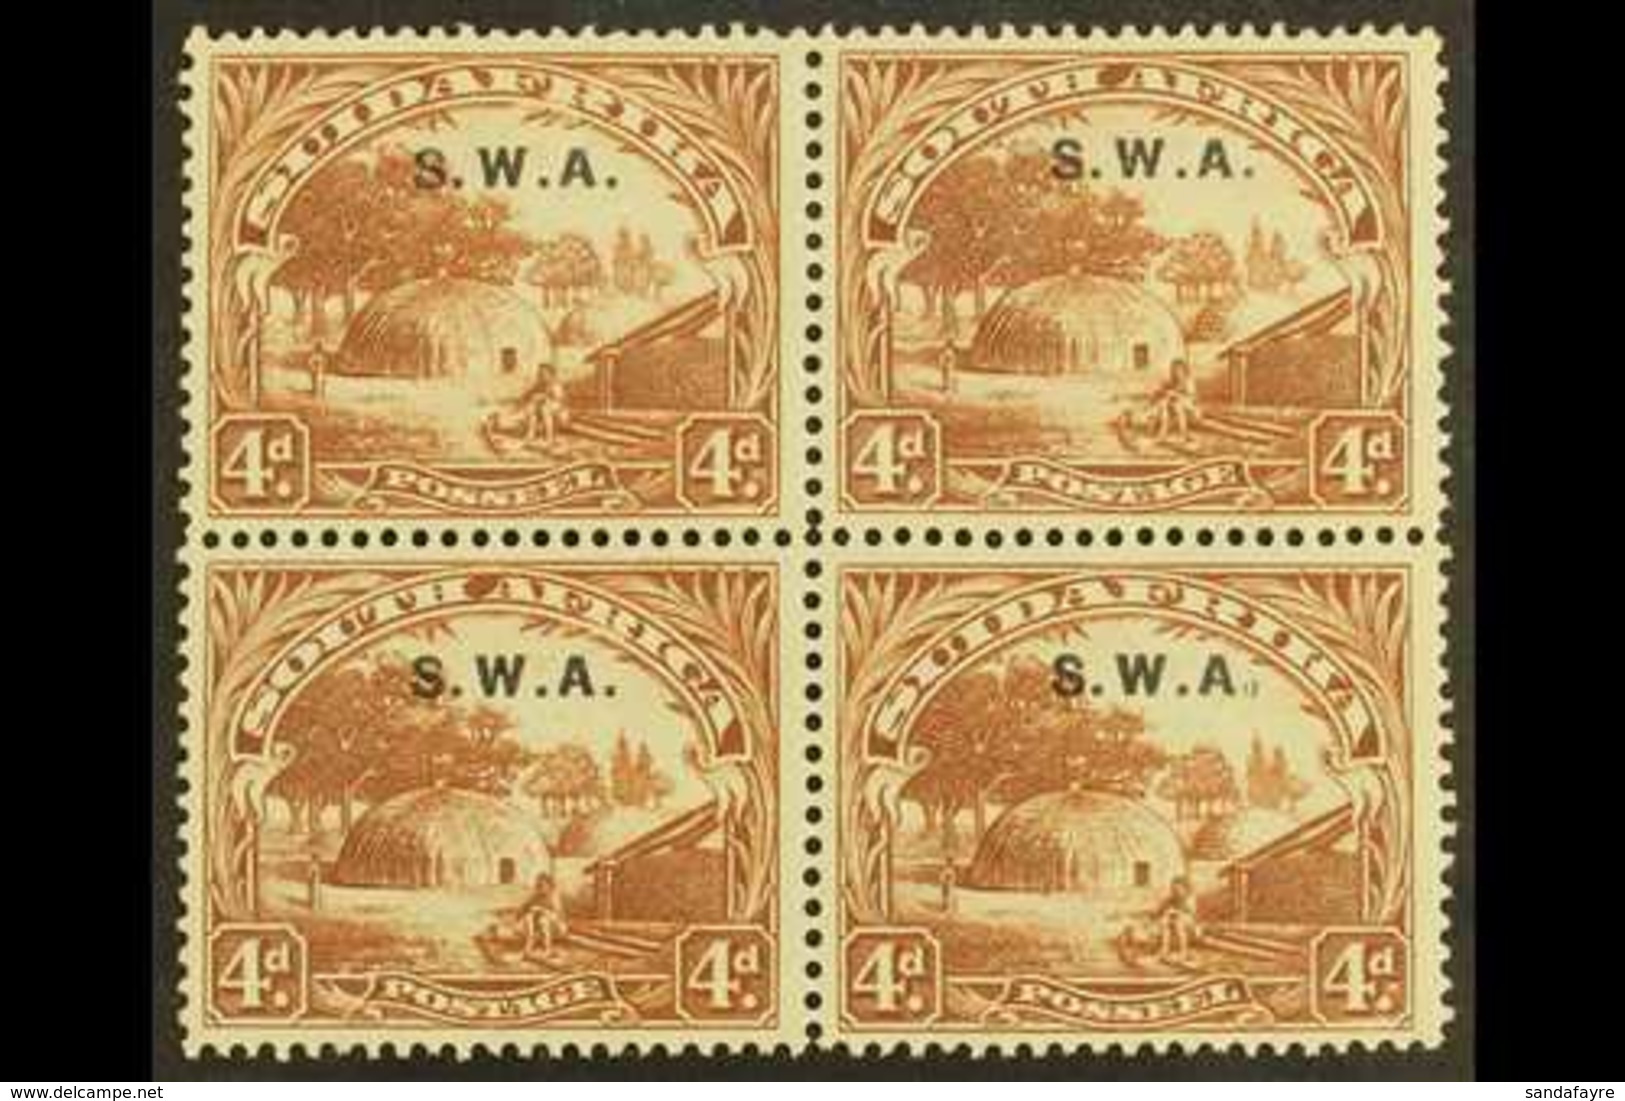 1927-30  4d Brown, Perf.14x13½, Broken Stop After "A" Variety, SG 62b, Very Fine/never Hinged Mint Block Of 4. For More  - Südwestafrika (1923-1990)